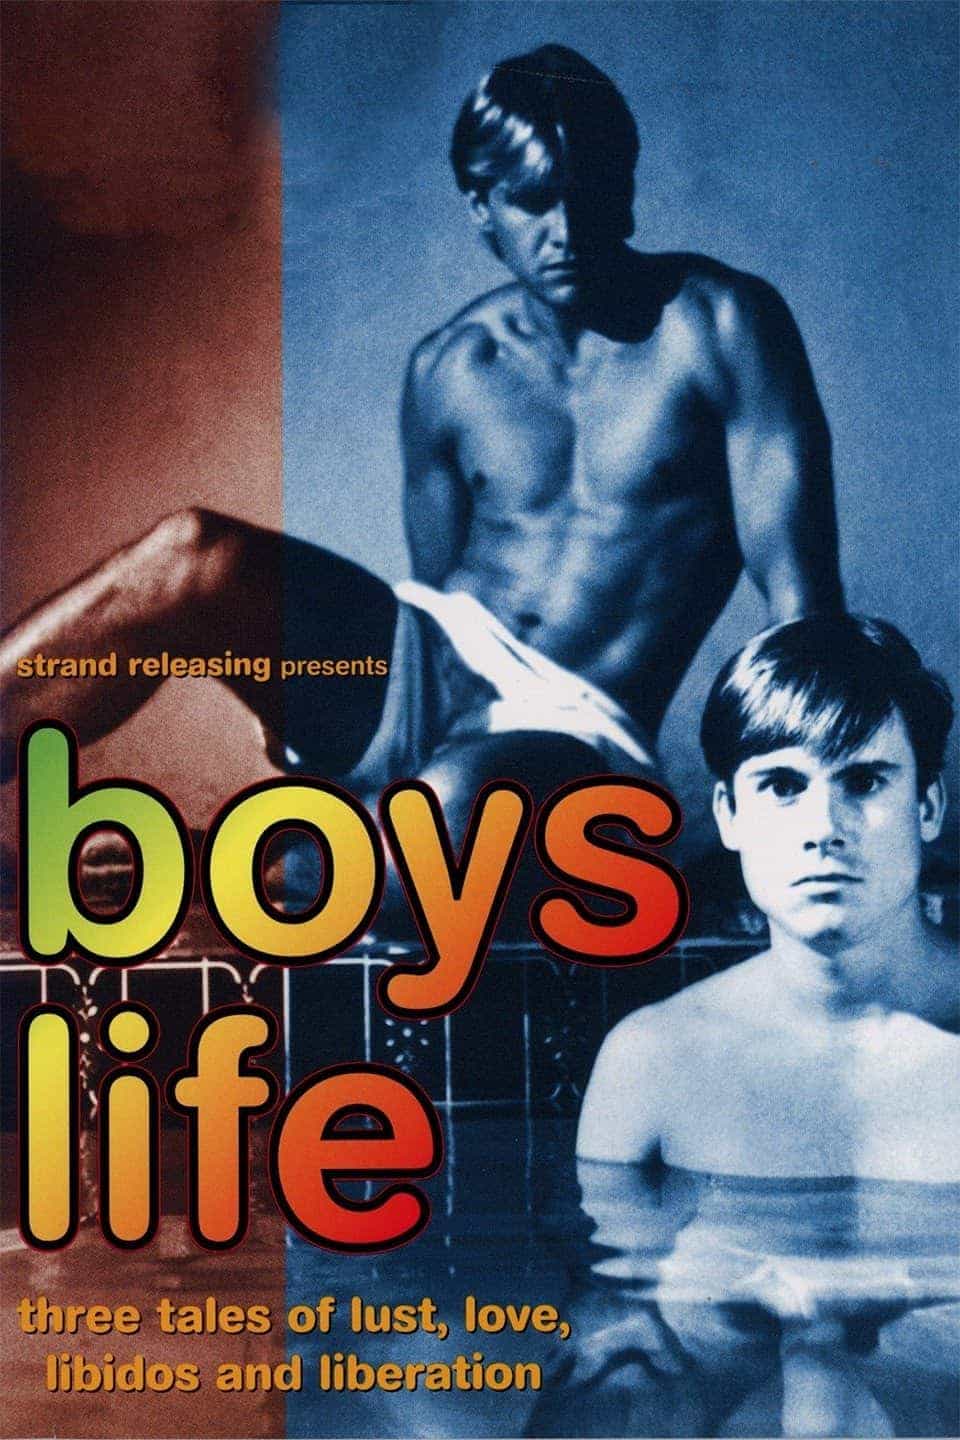 Boys Life: Three Stories of Love, Lust and Liberation